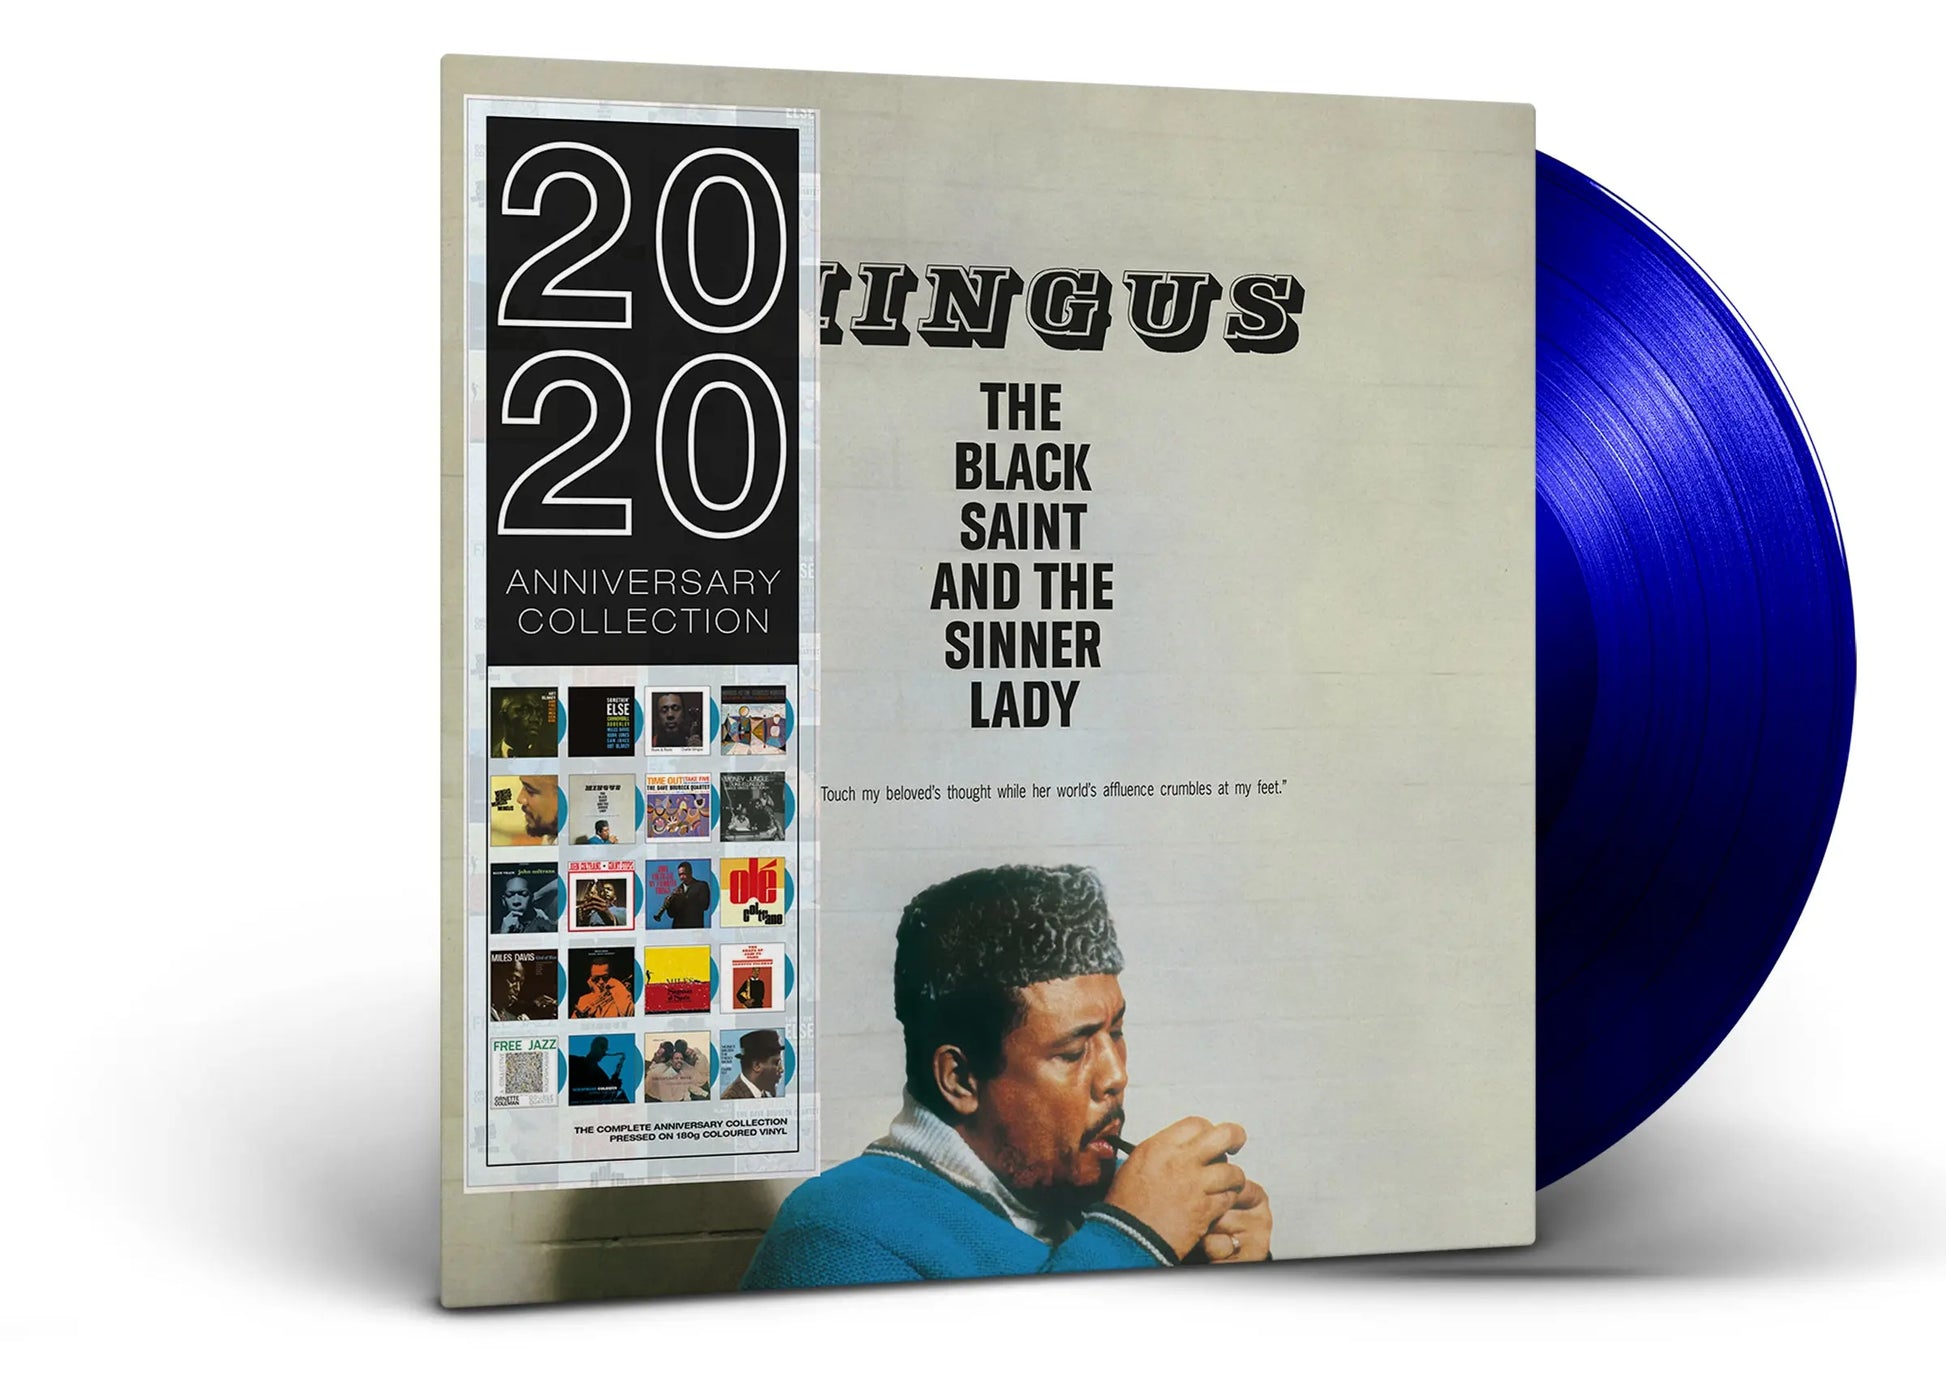 Charles Mingus - The Black Saint And The Sinner Lady [Limited Blue Colored Vinyl LP]